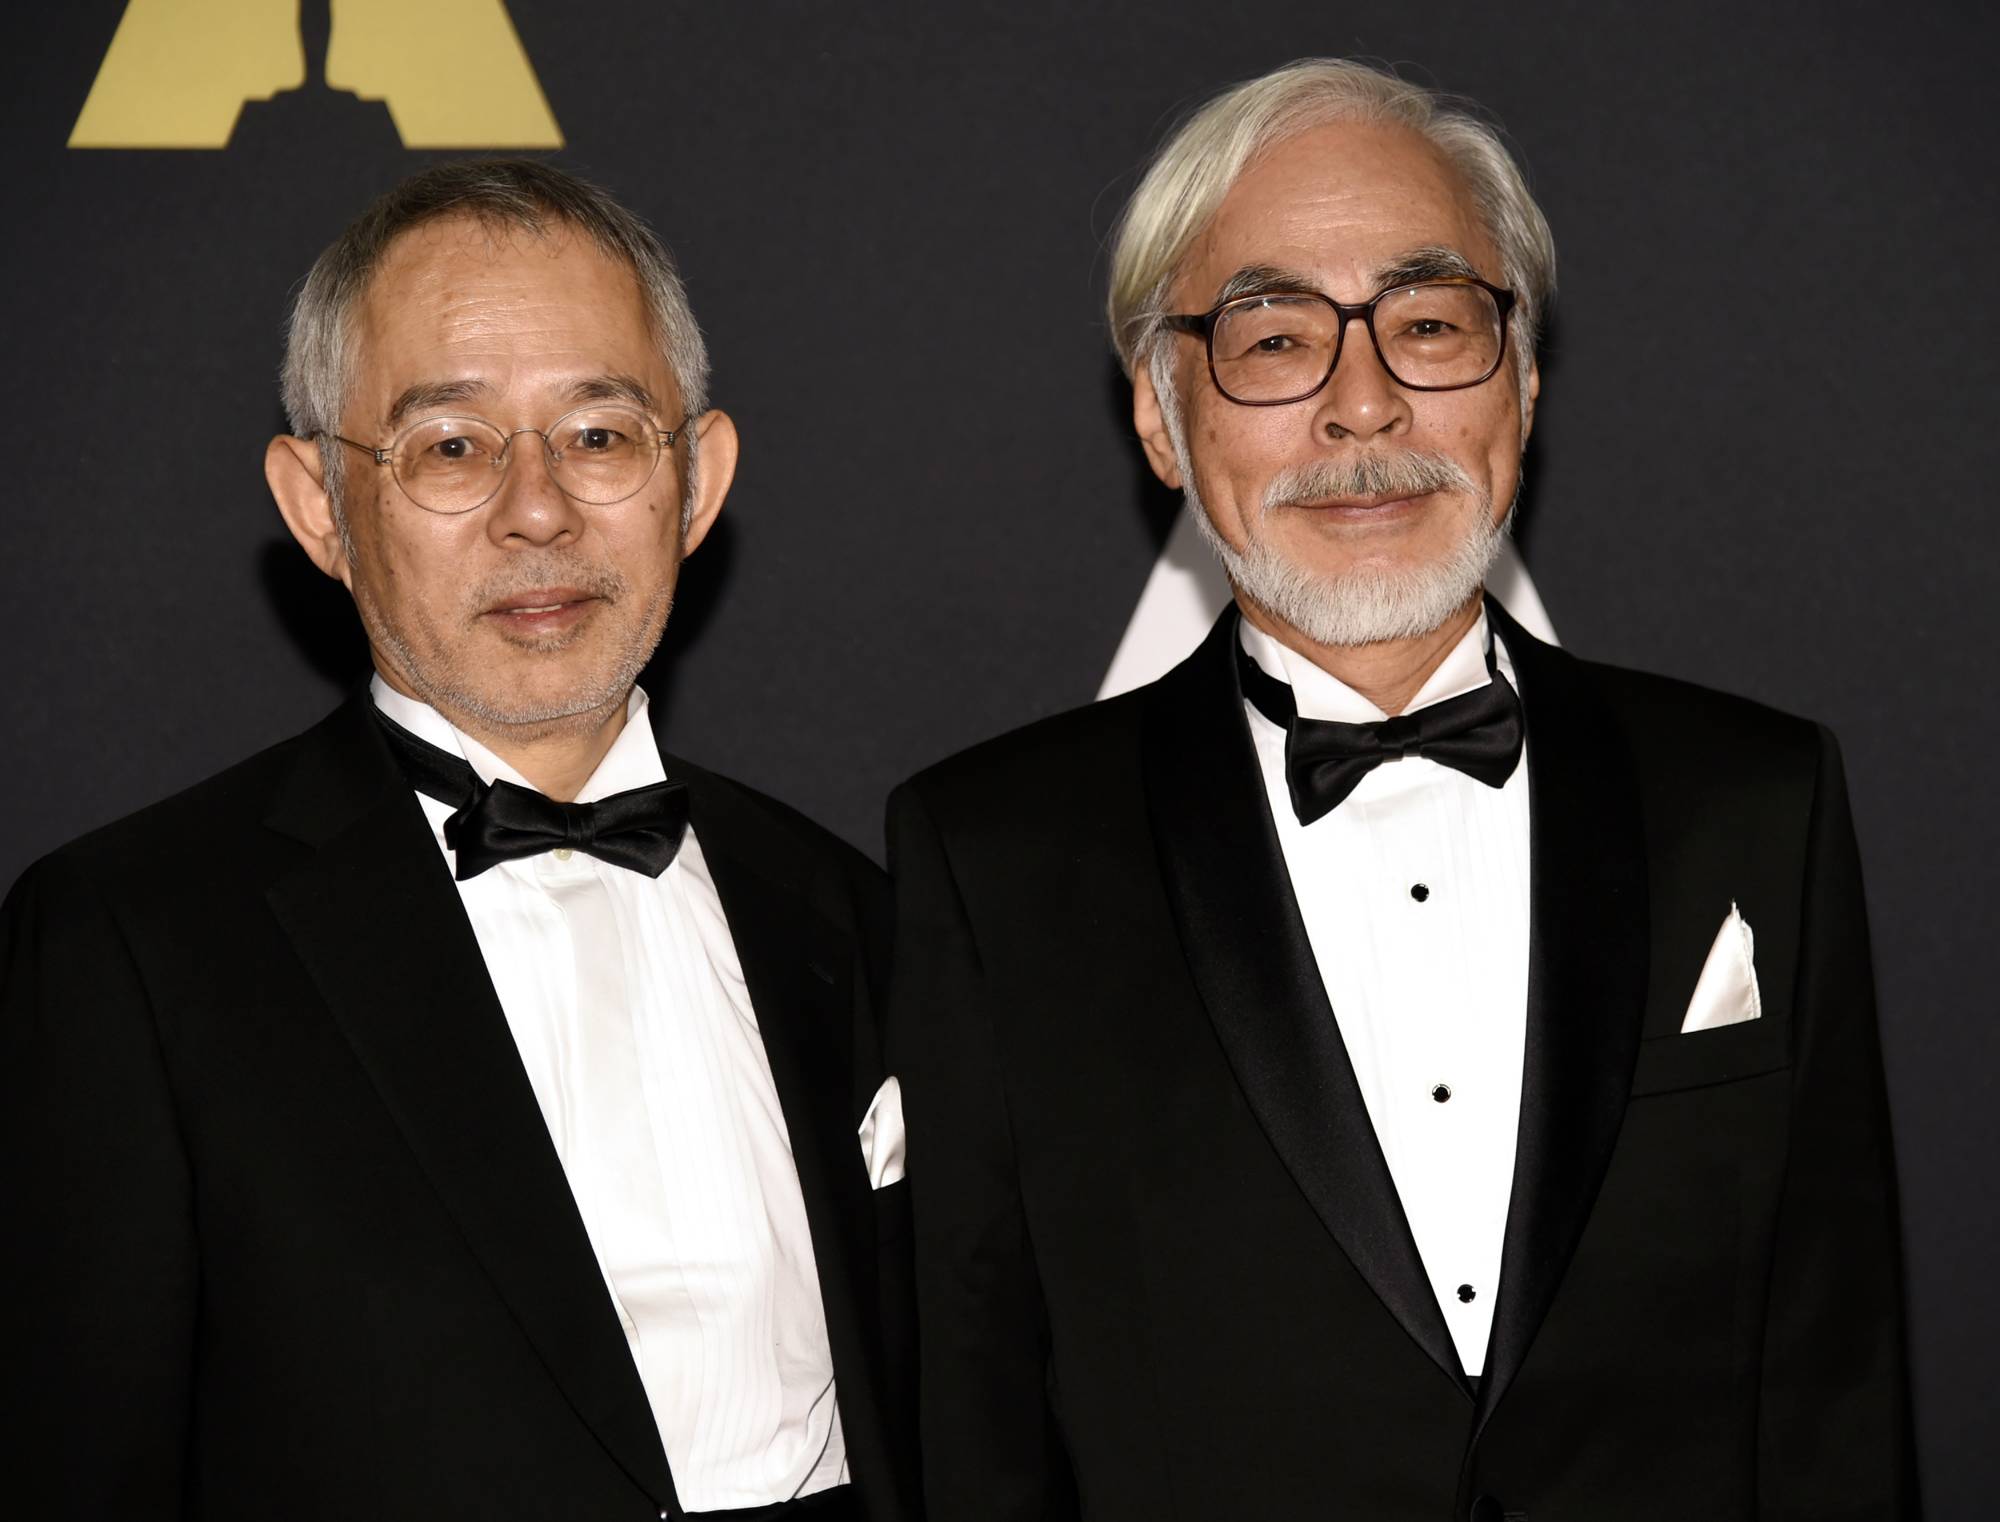 Studio Ghibli co-founders Toshio Suzuki (left) and Hayao Miyazaki attend the Academy of Motion Picture Arts and Sciences Governors Awards in Los Angeles in 2014. | REUTERS